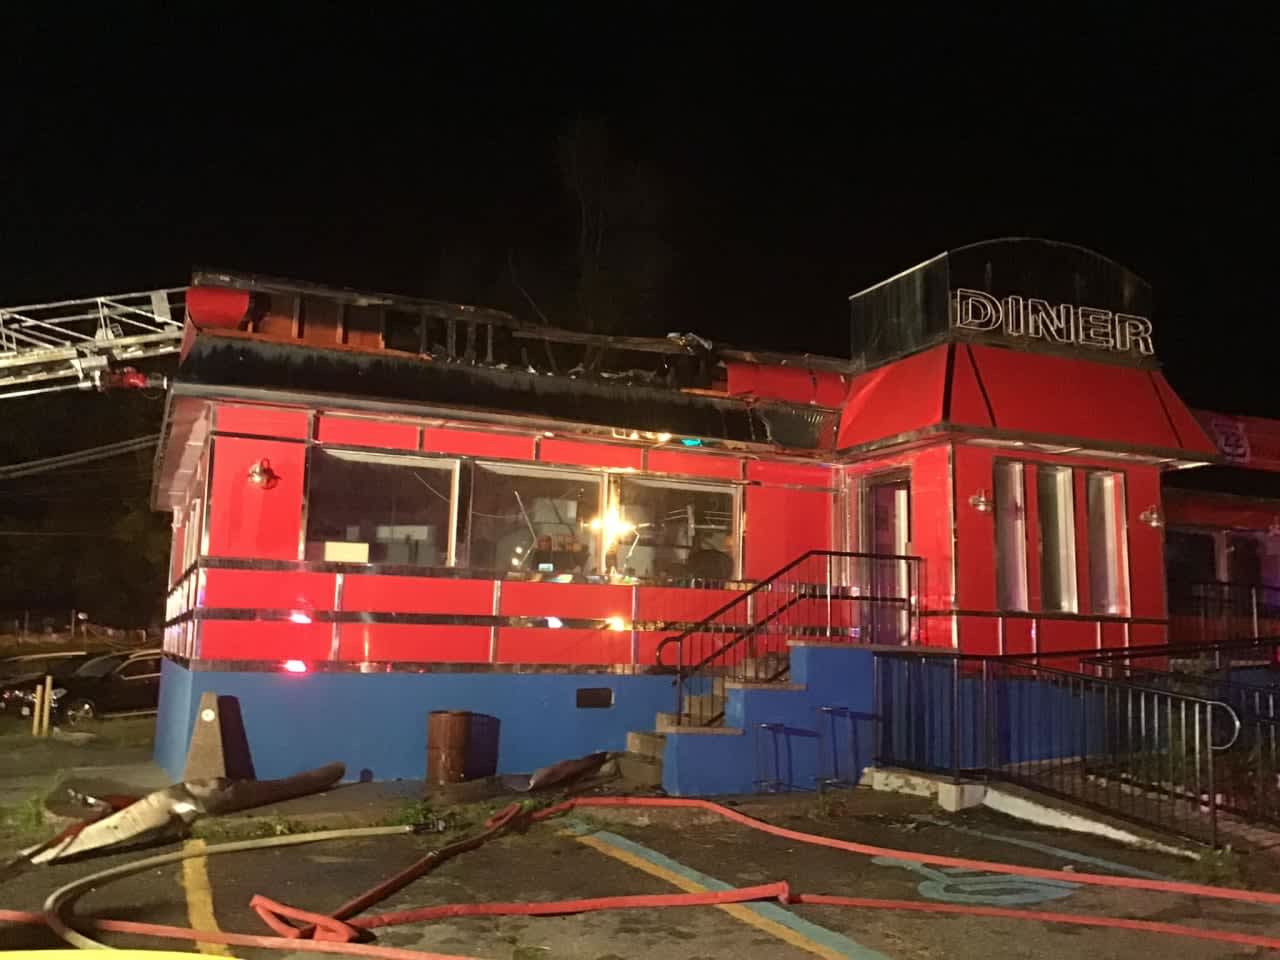 A new diner in Warren County went up in flames just hours before it was scheduled to have its soft opening, leaving the owner heartbroken and desperate to rebuild.